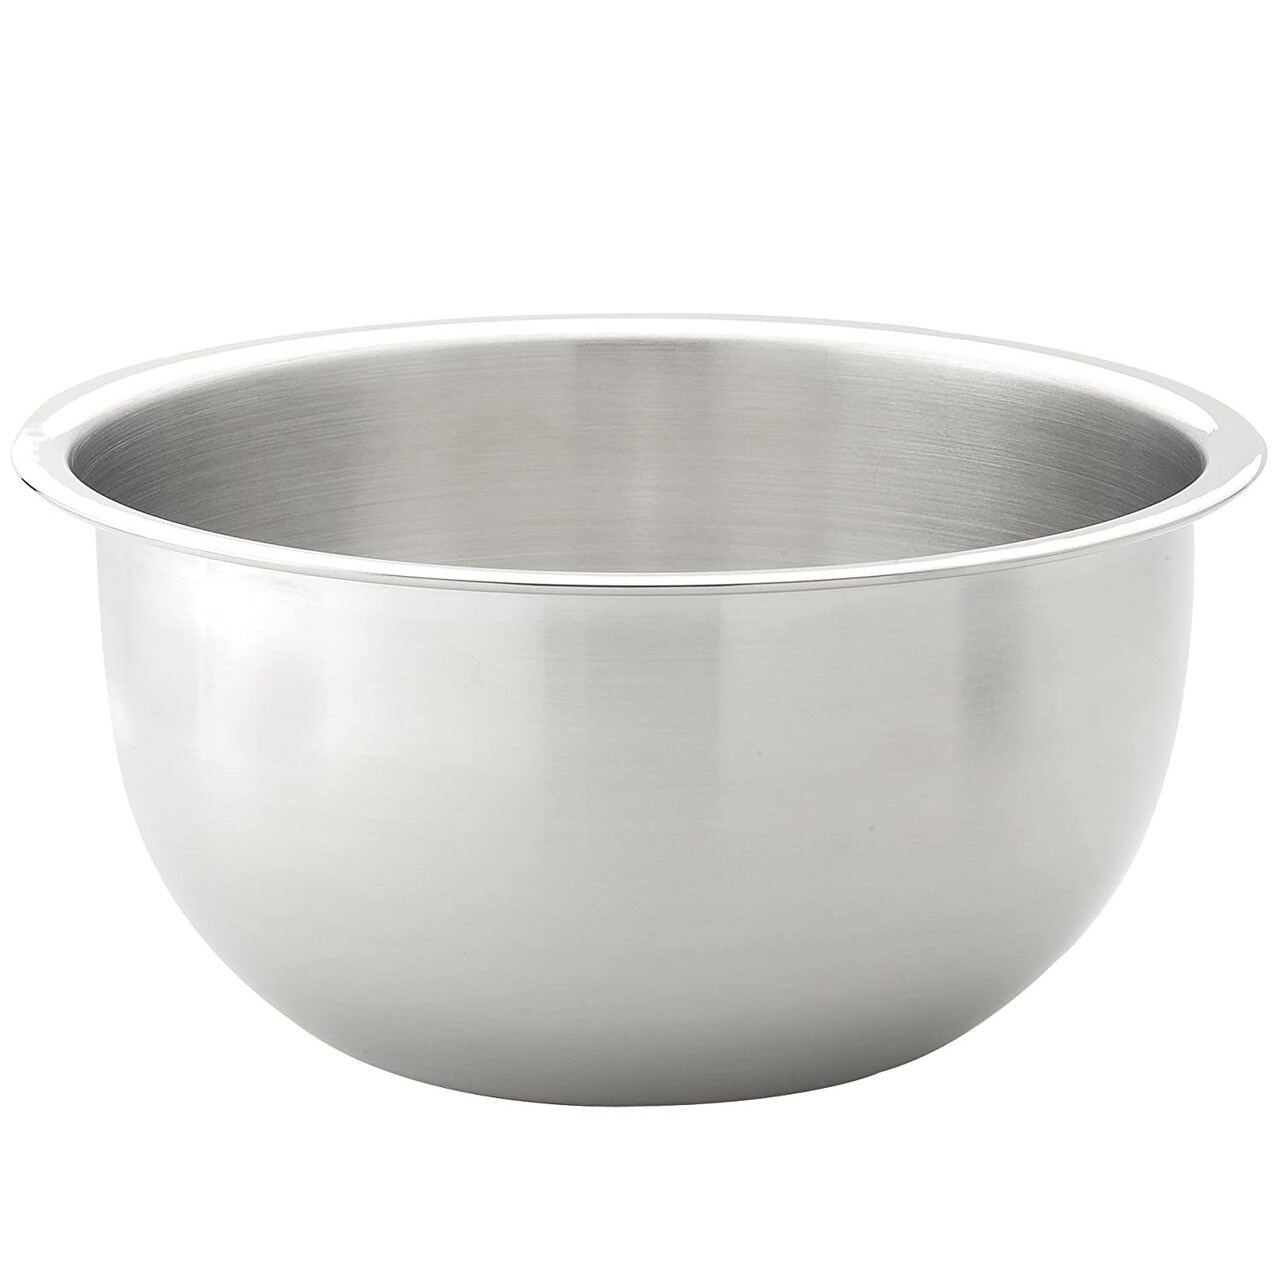 Stainless Steel Mixing Bowl - 18/8 Stainless Steel, Extra Wide Lip,  Weighted Design, Flat Bottom with High Sides, Dishwasher Safe